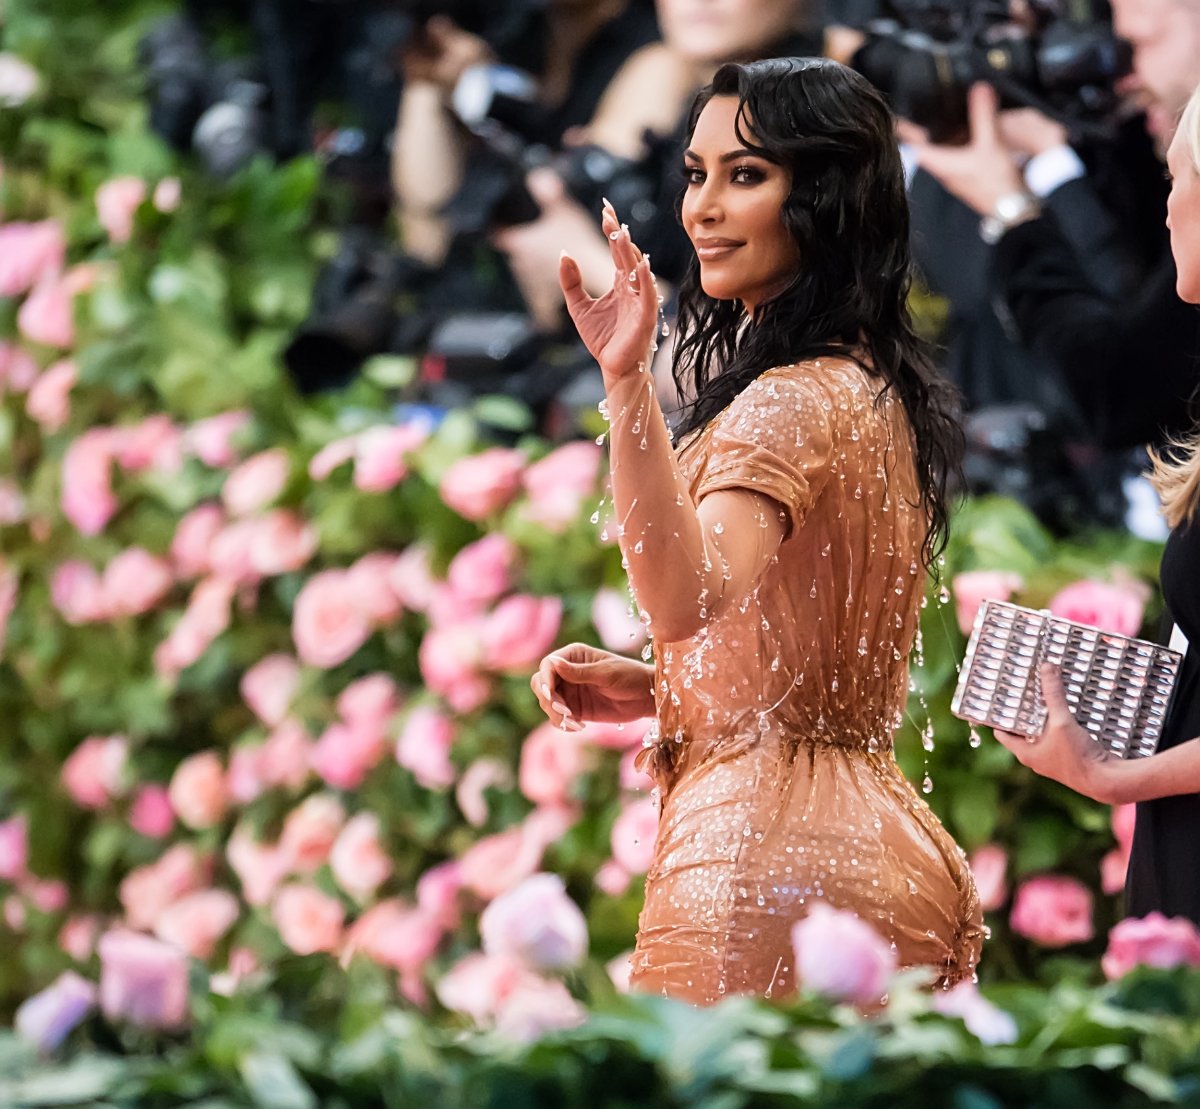 Kim Kardashian is seen arriving to the 2019 Met Gala Celebrating Camp: Notes on Fashion at the Metropolitan Museum of Art on May 6, 2019 in New York City.